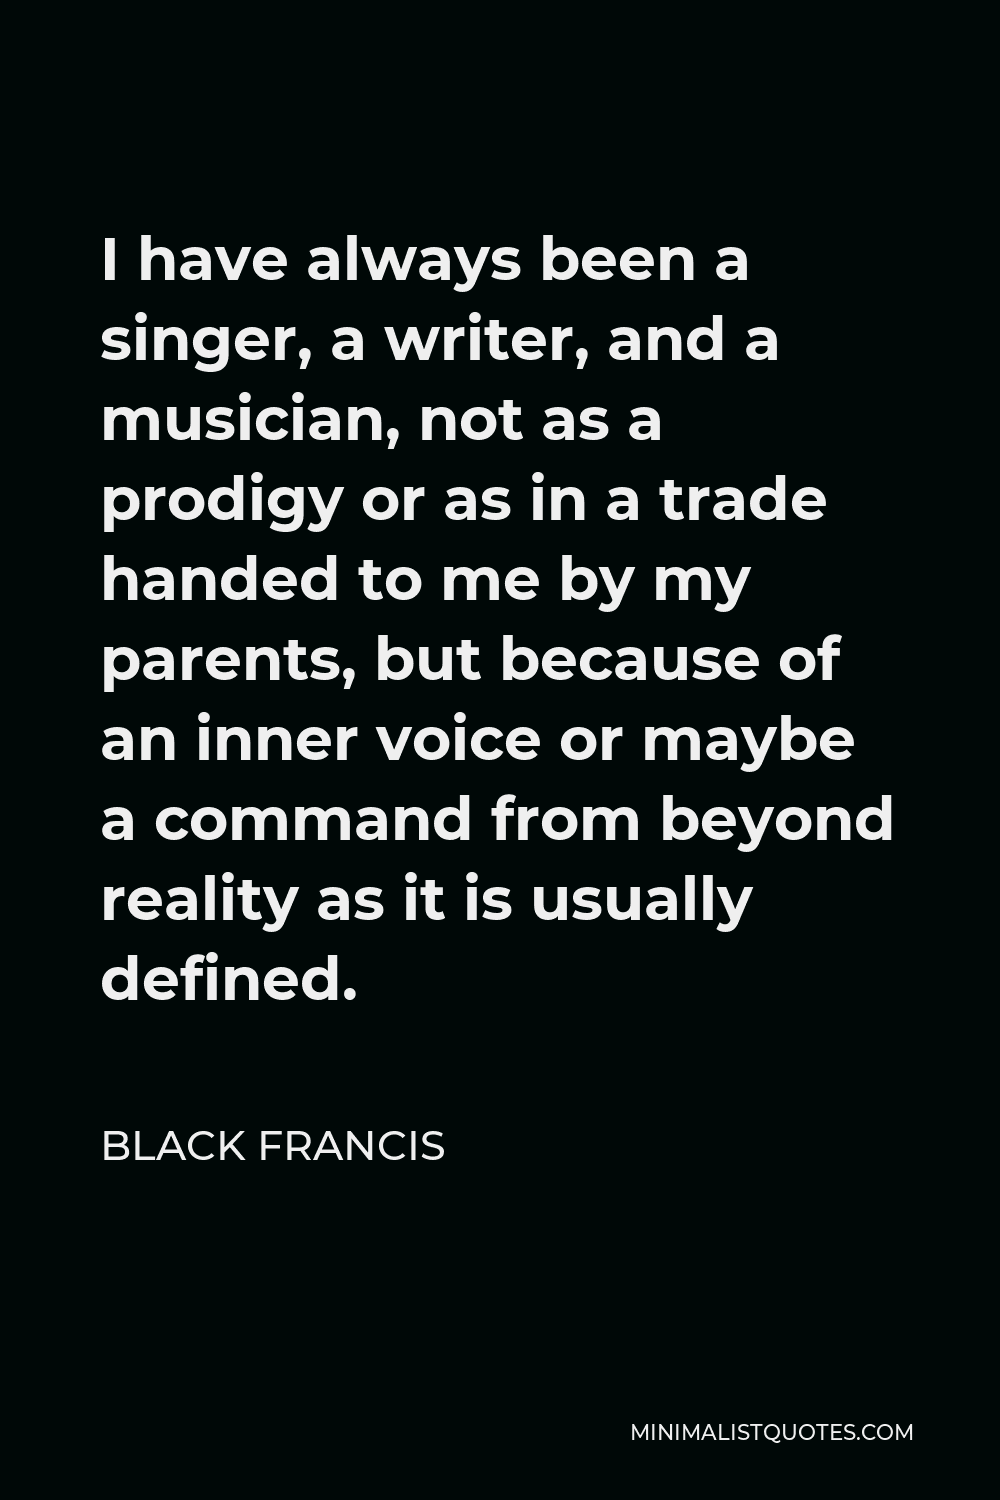 Black Francis Quote - I have always been a singer, a writer, and a musician, not as a prodigy or as in a trade handed to me by my parents, but because of an inner voice or maybe a command from beyond reality as it is usually defined.